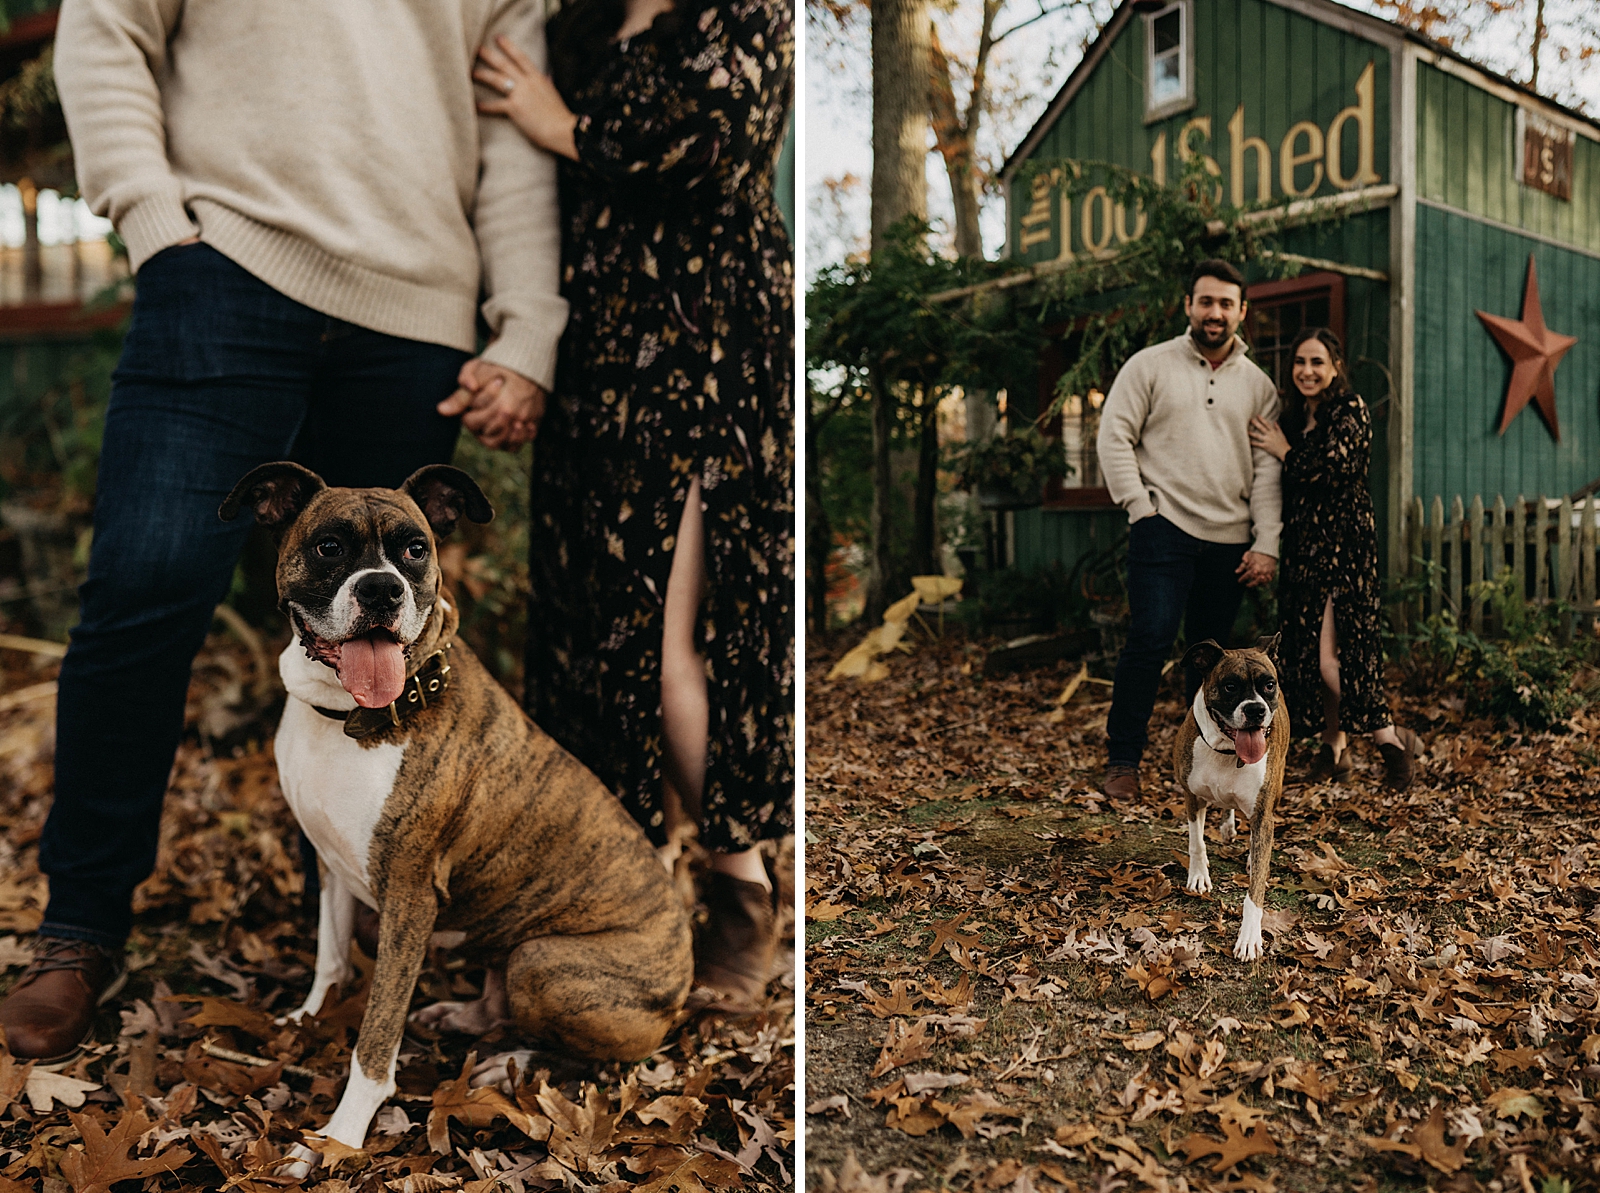 Couple standing together on dead leaf autumn ground with dog